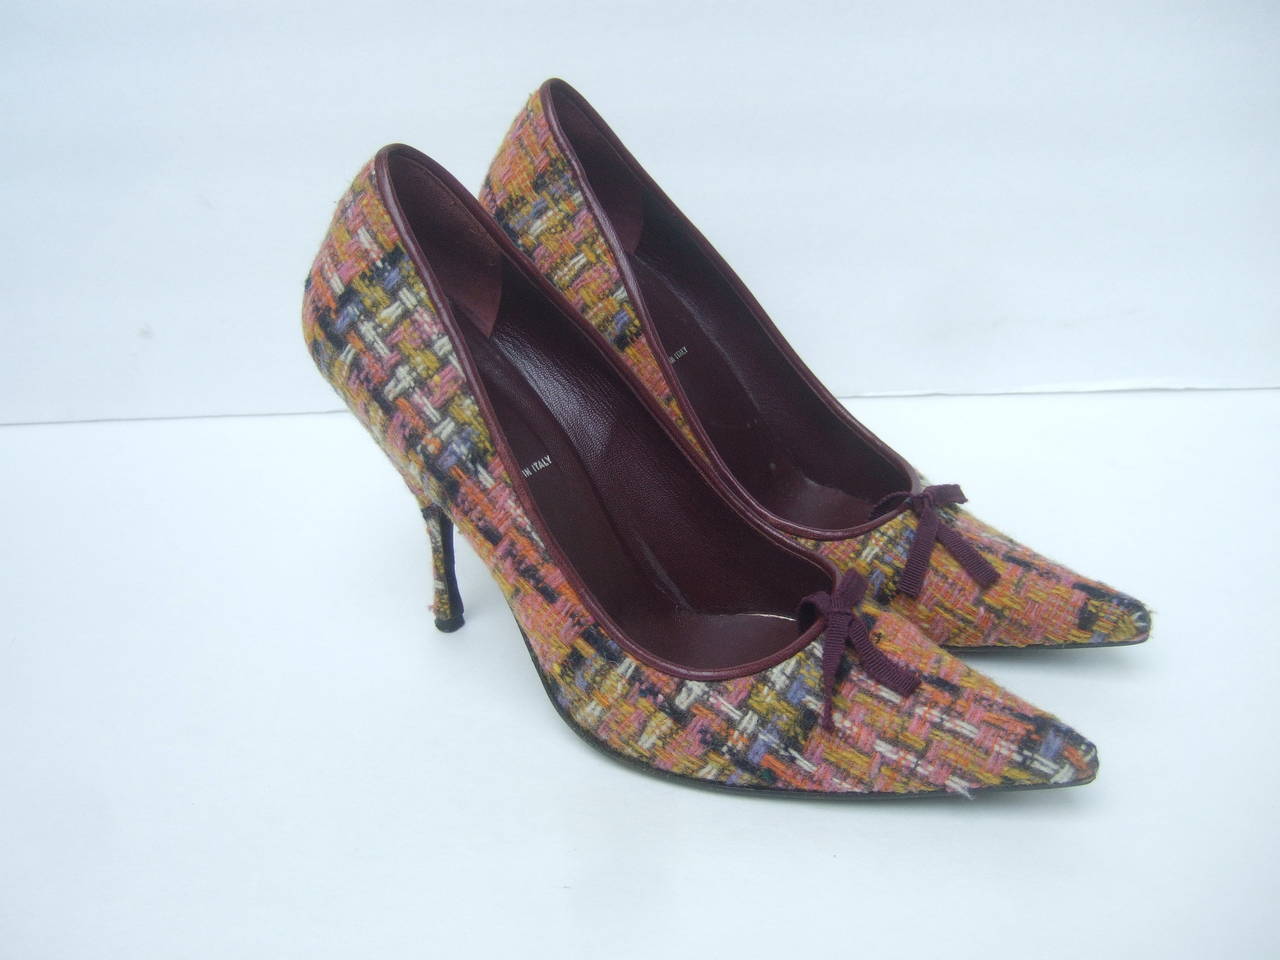 Miu Miu Plaid Wool Pumps Made in Italy Size 38 In Excellent Condition For Sale In University City, MO